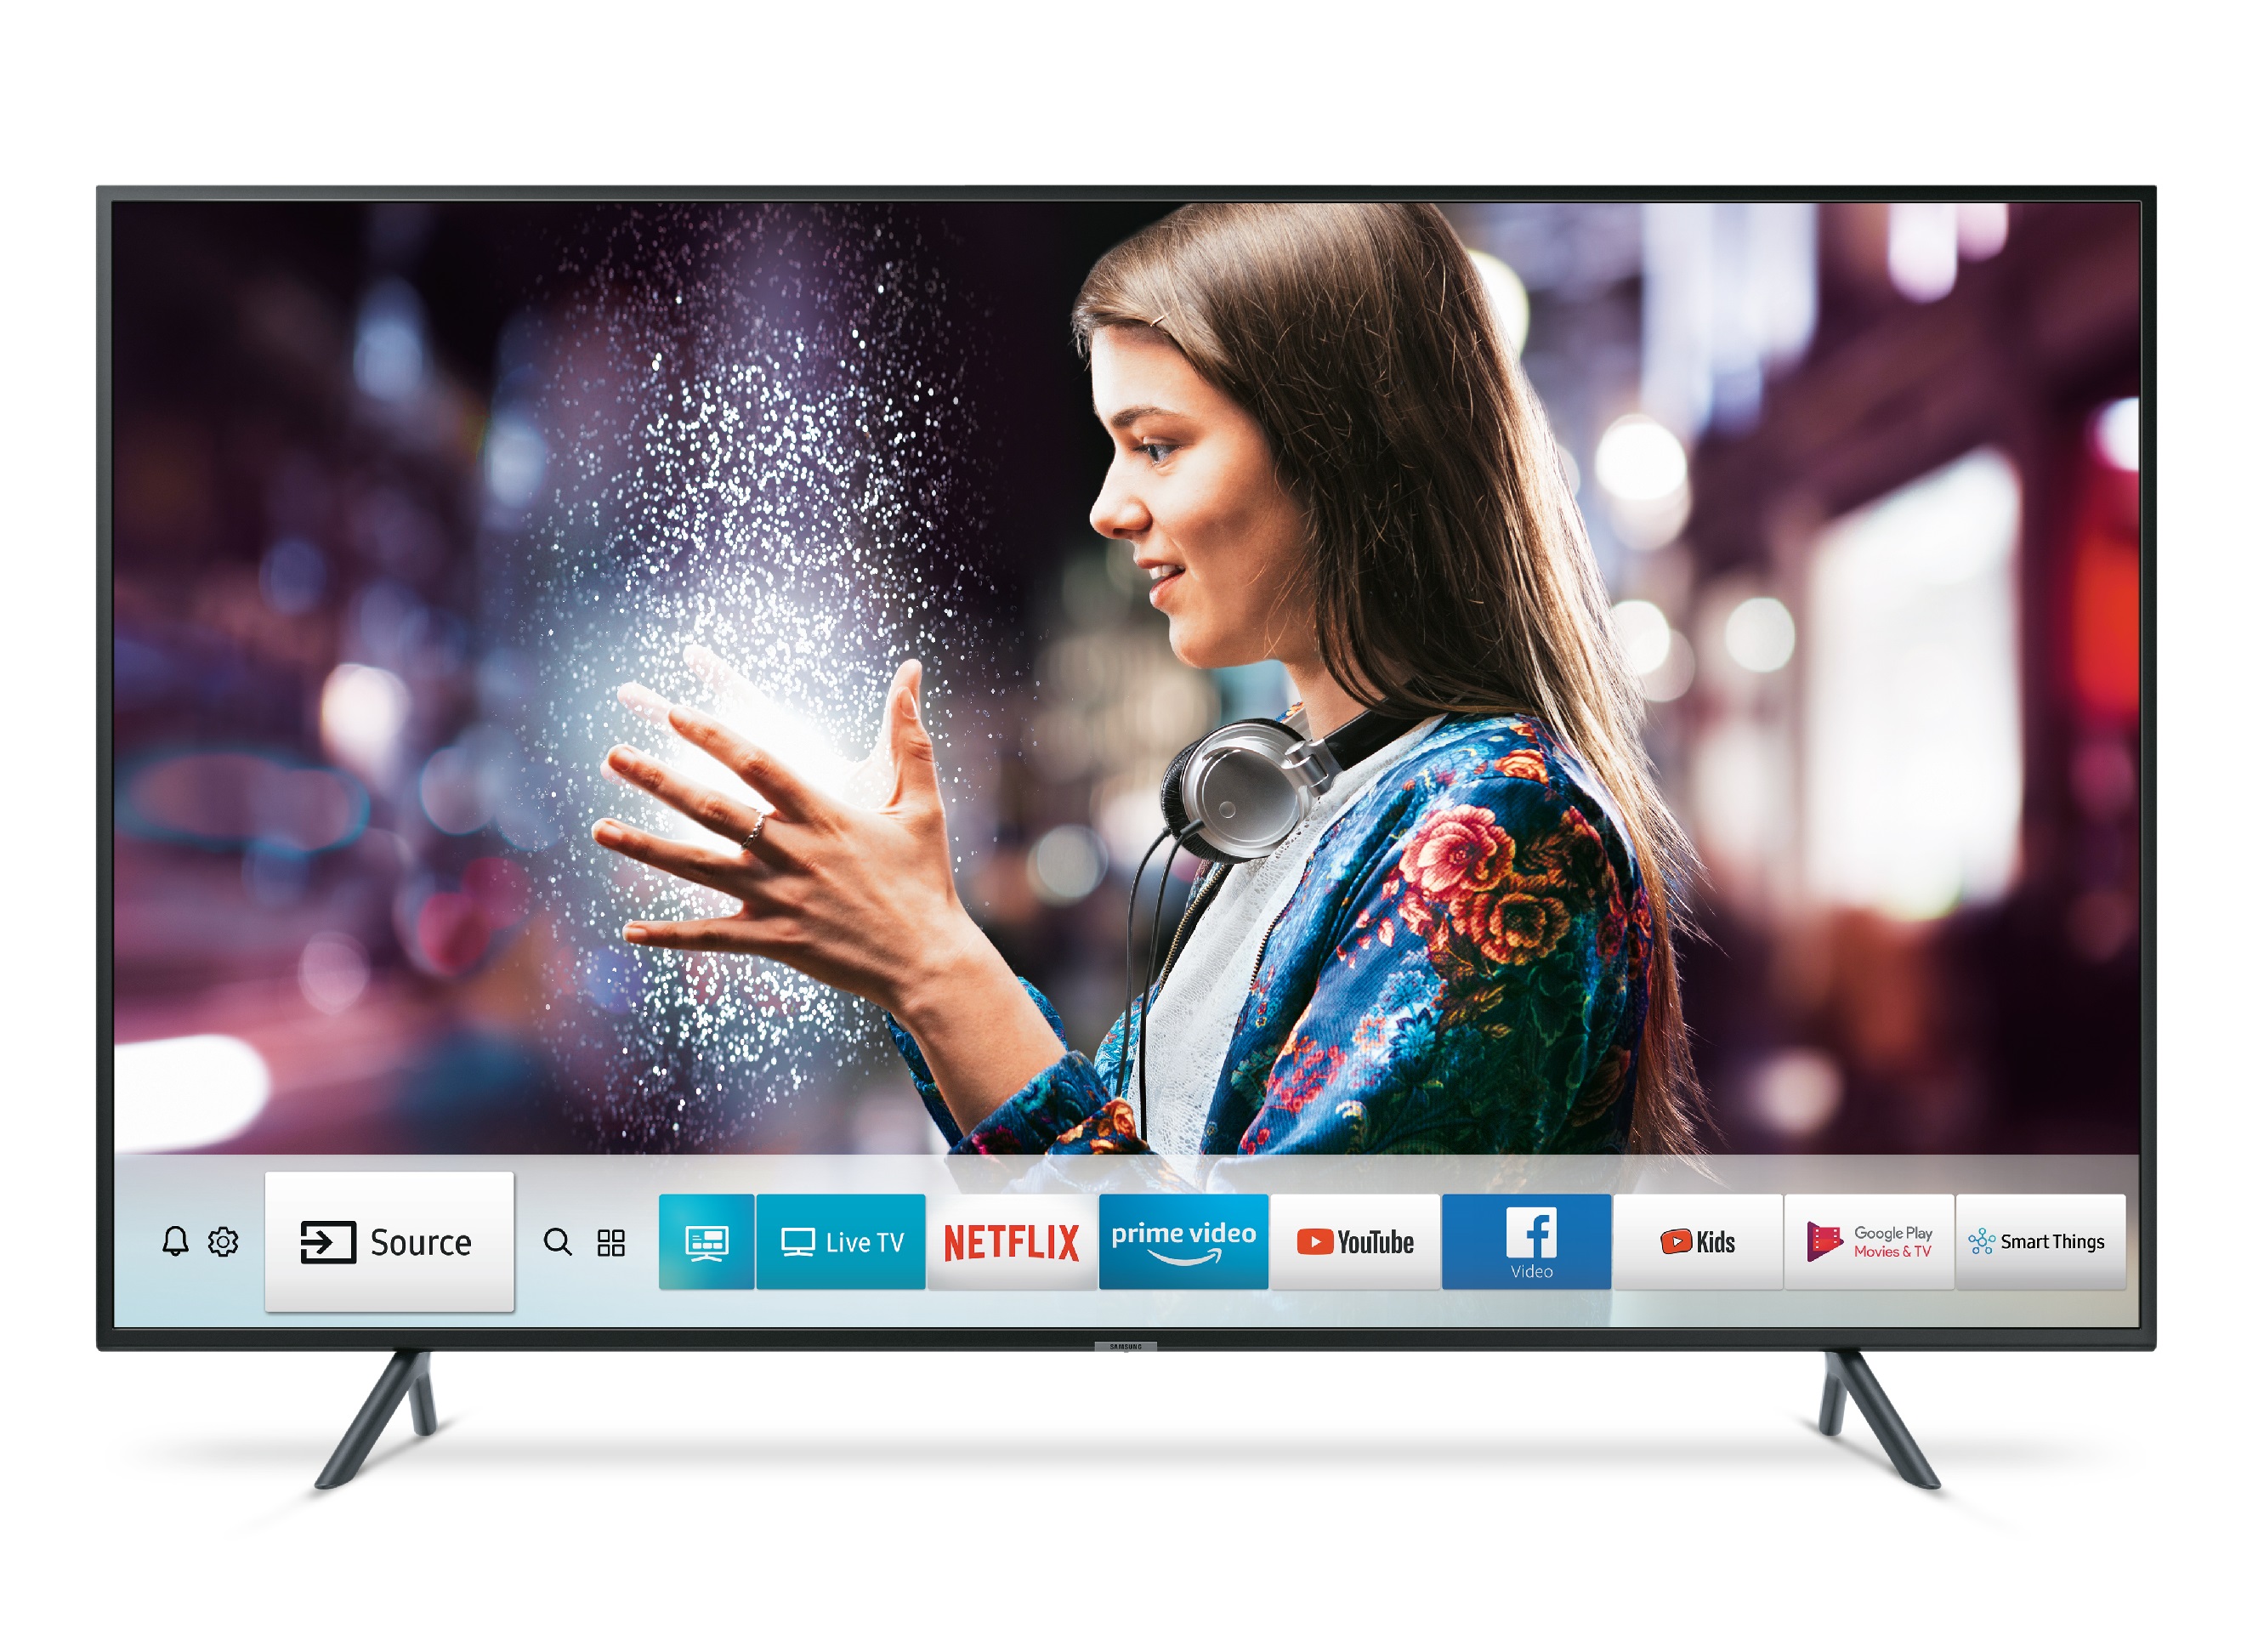 Samsung launches a new range of smart TVs in India - SamMobile